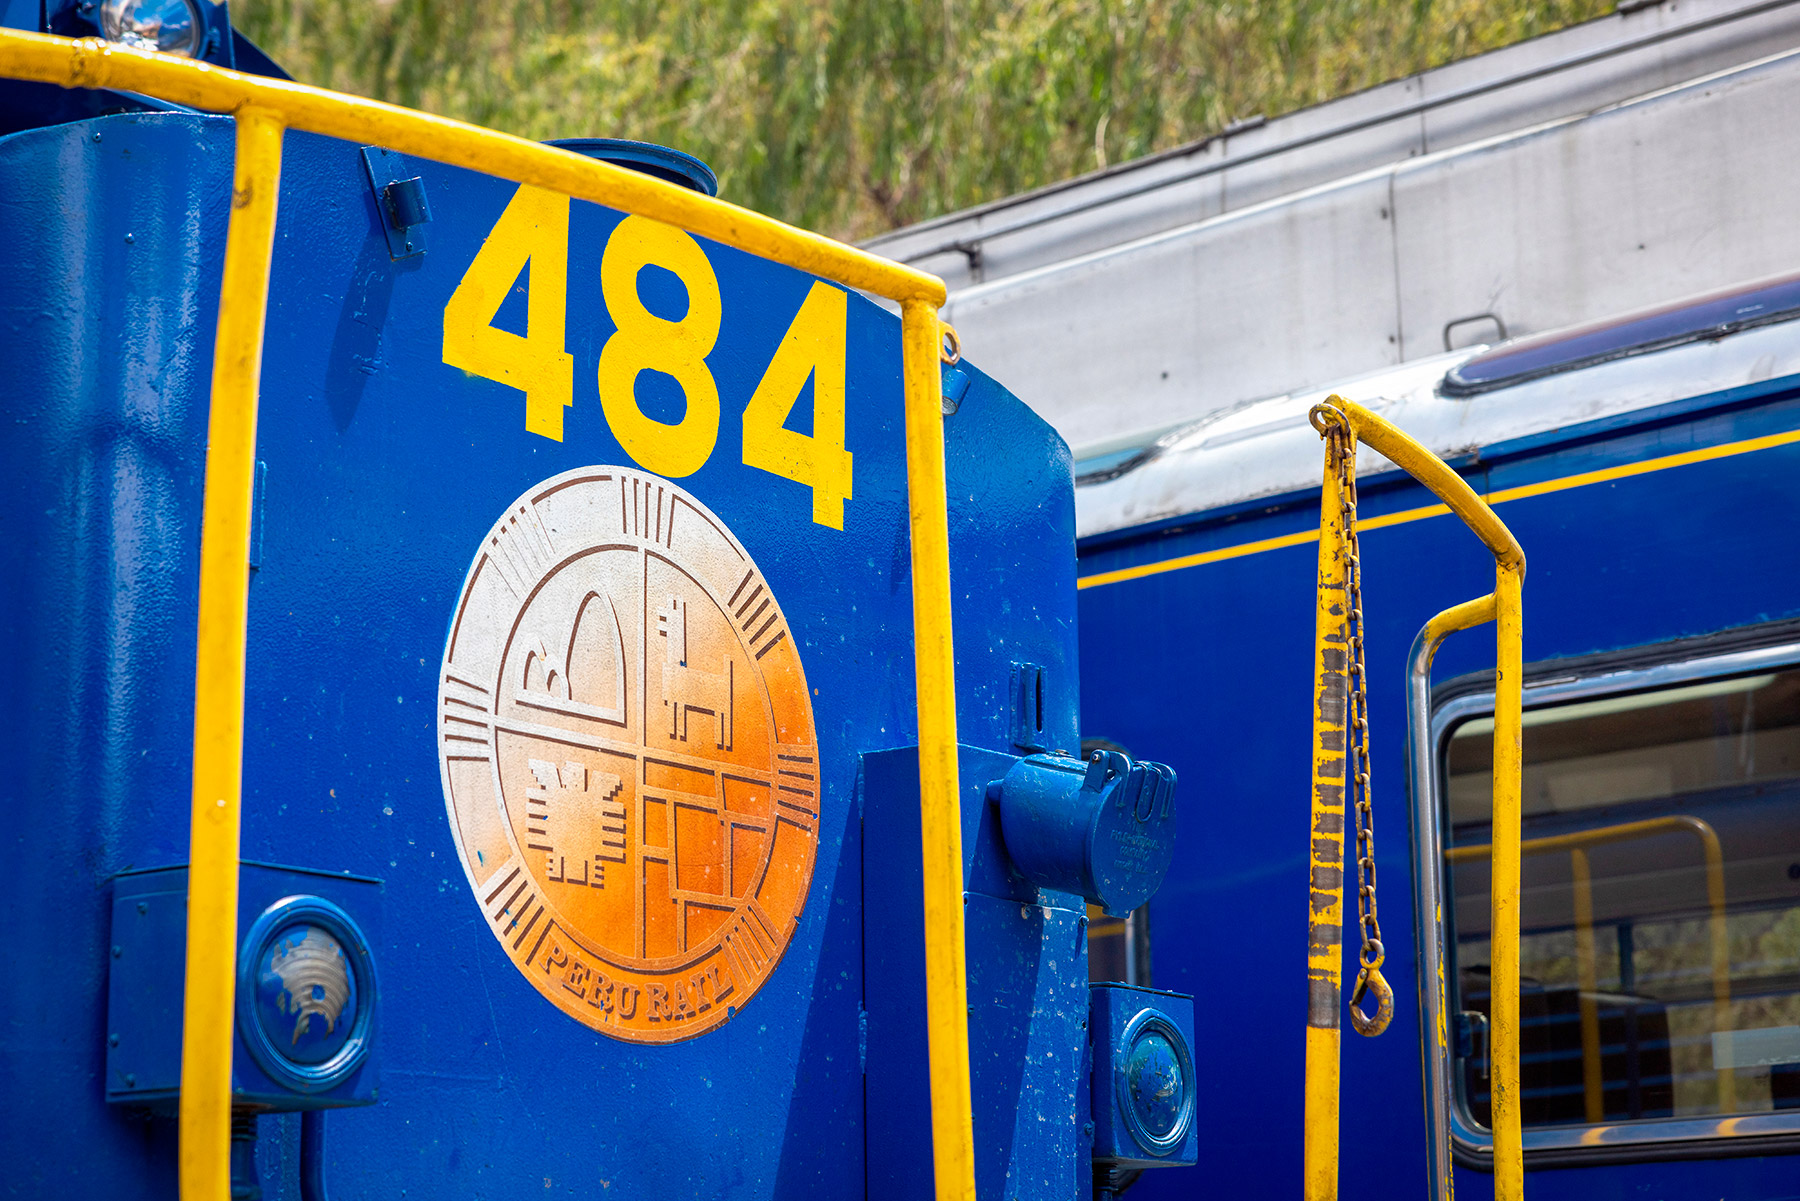 The PeruRail crest on a locomotive at Ollantaytambo